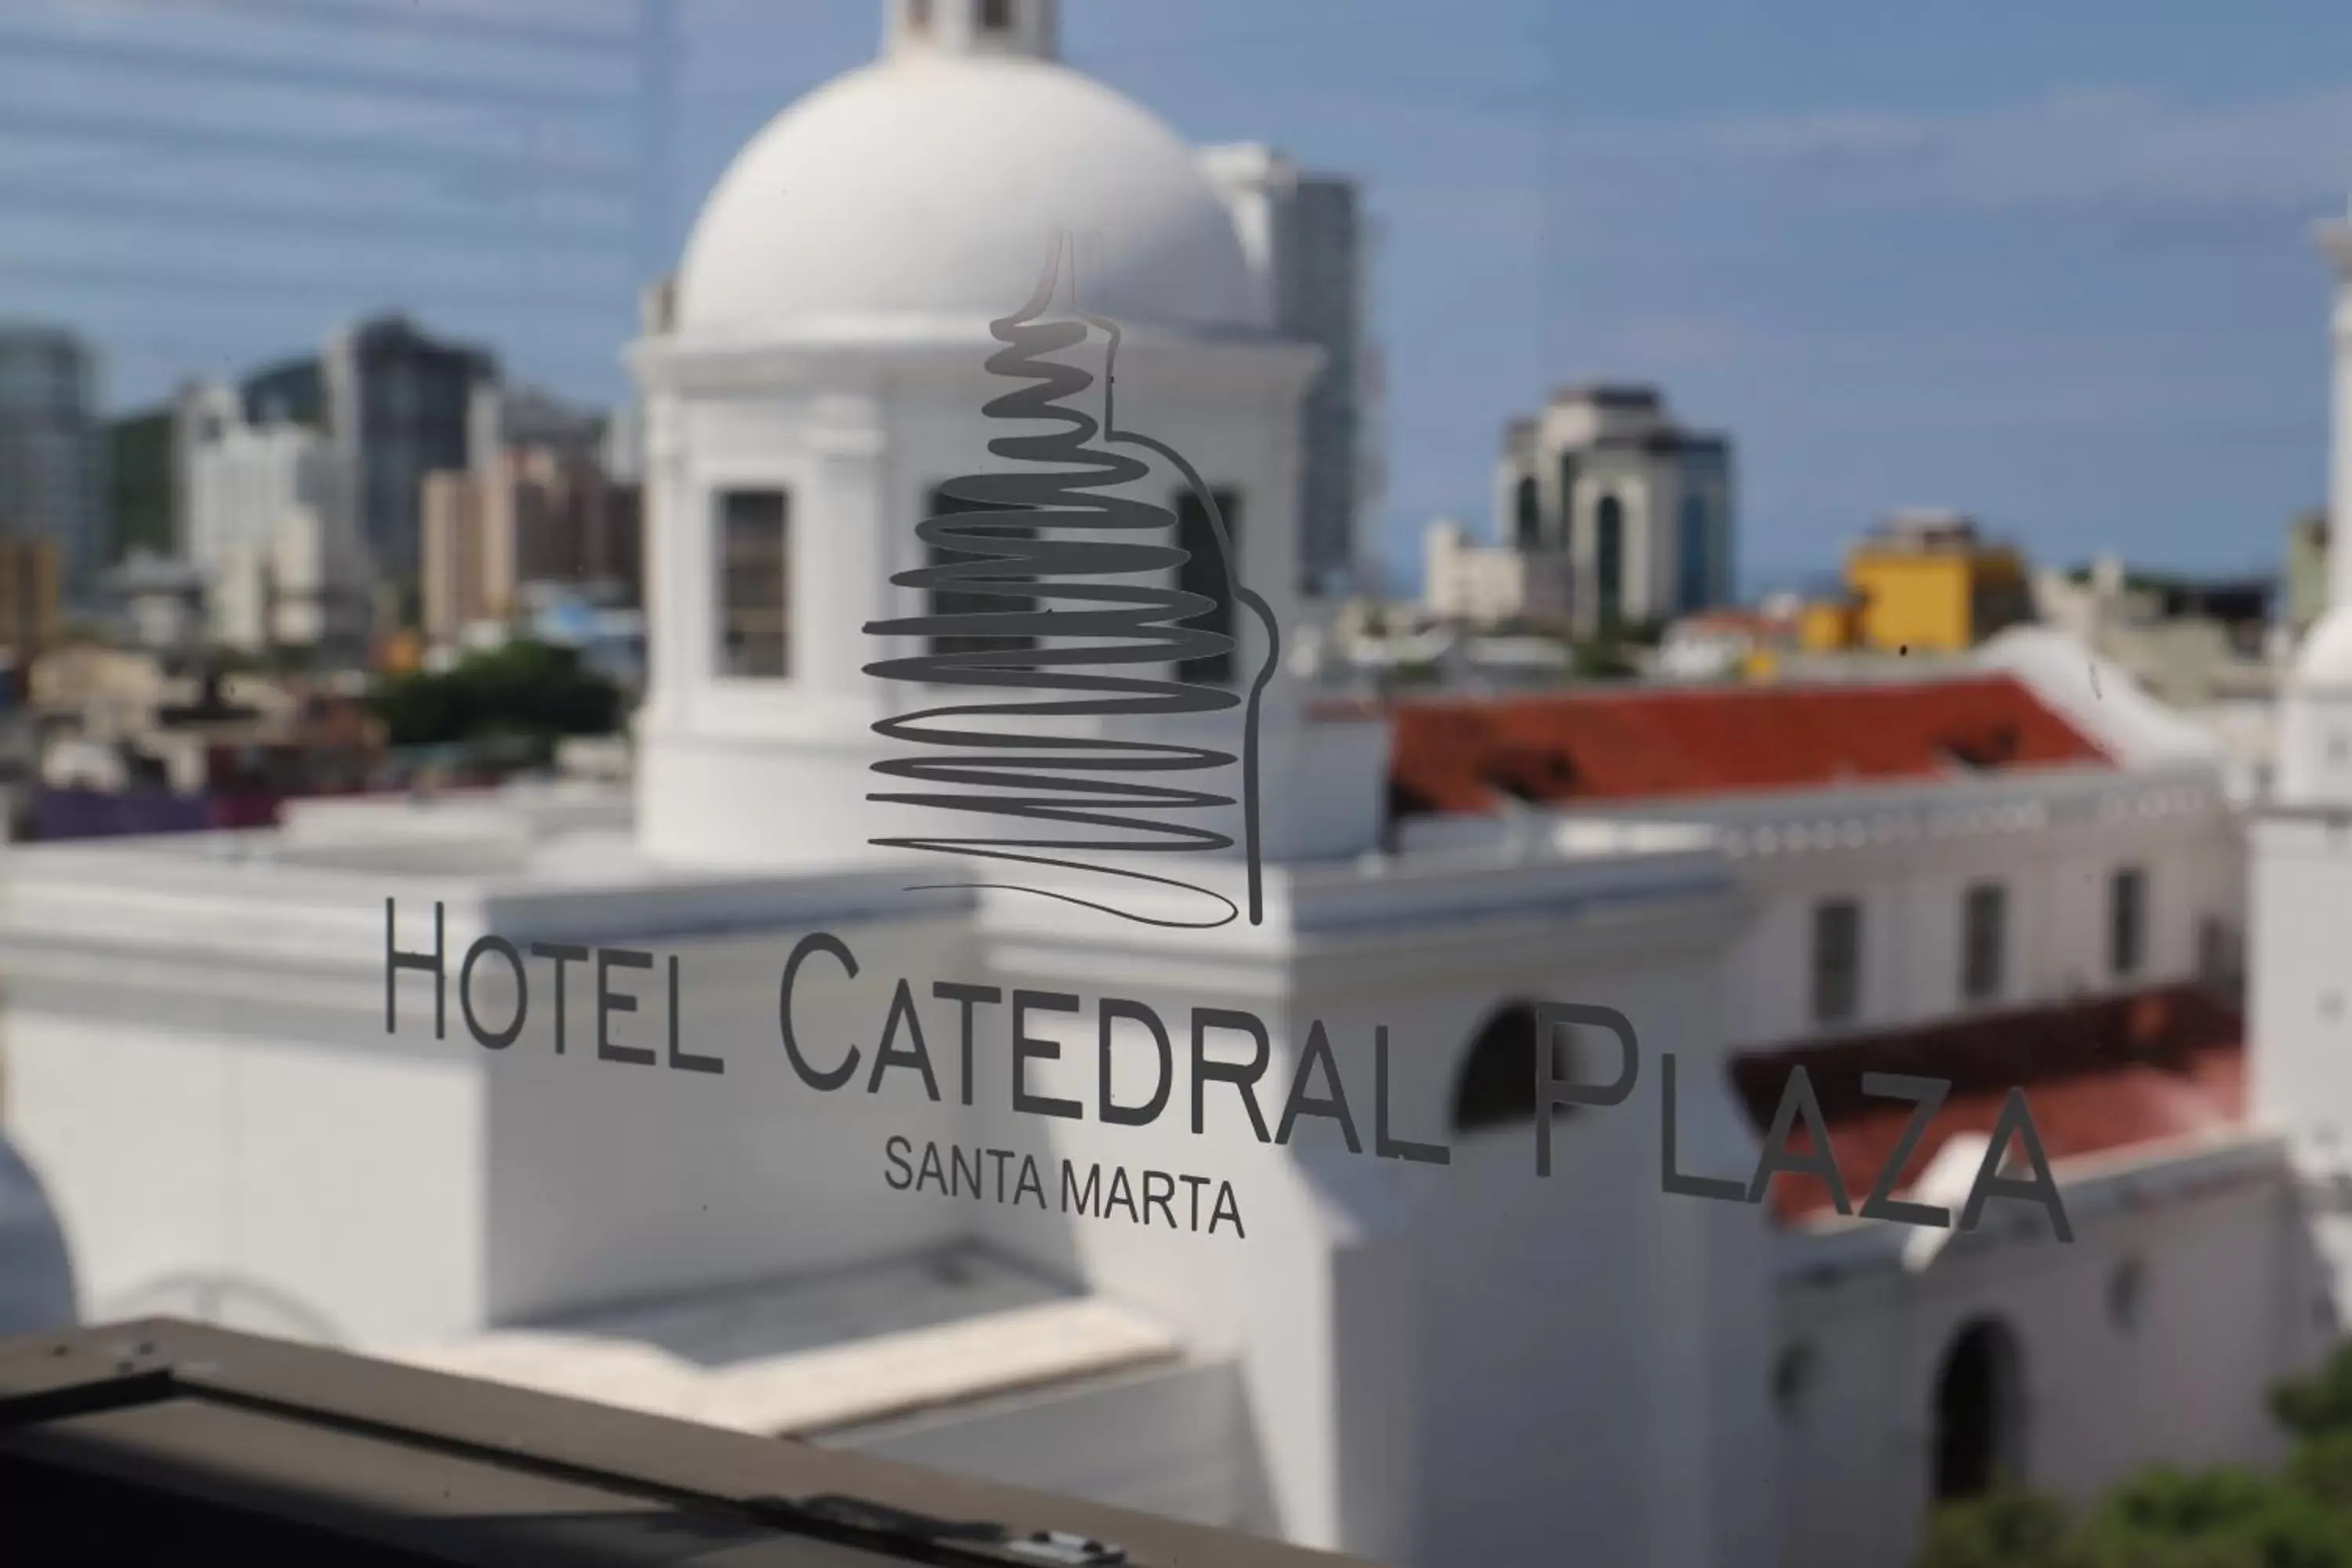 Property building in Hotel Catedral Plaza